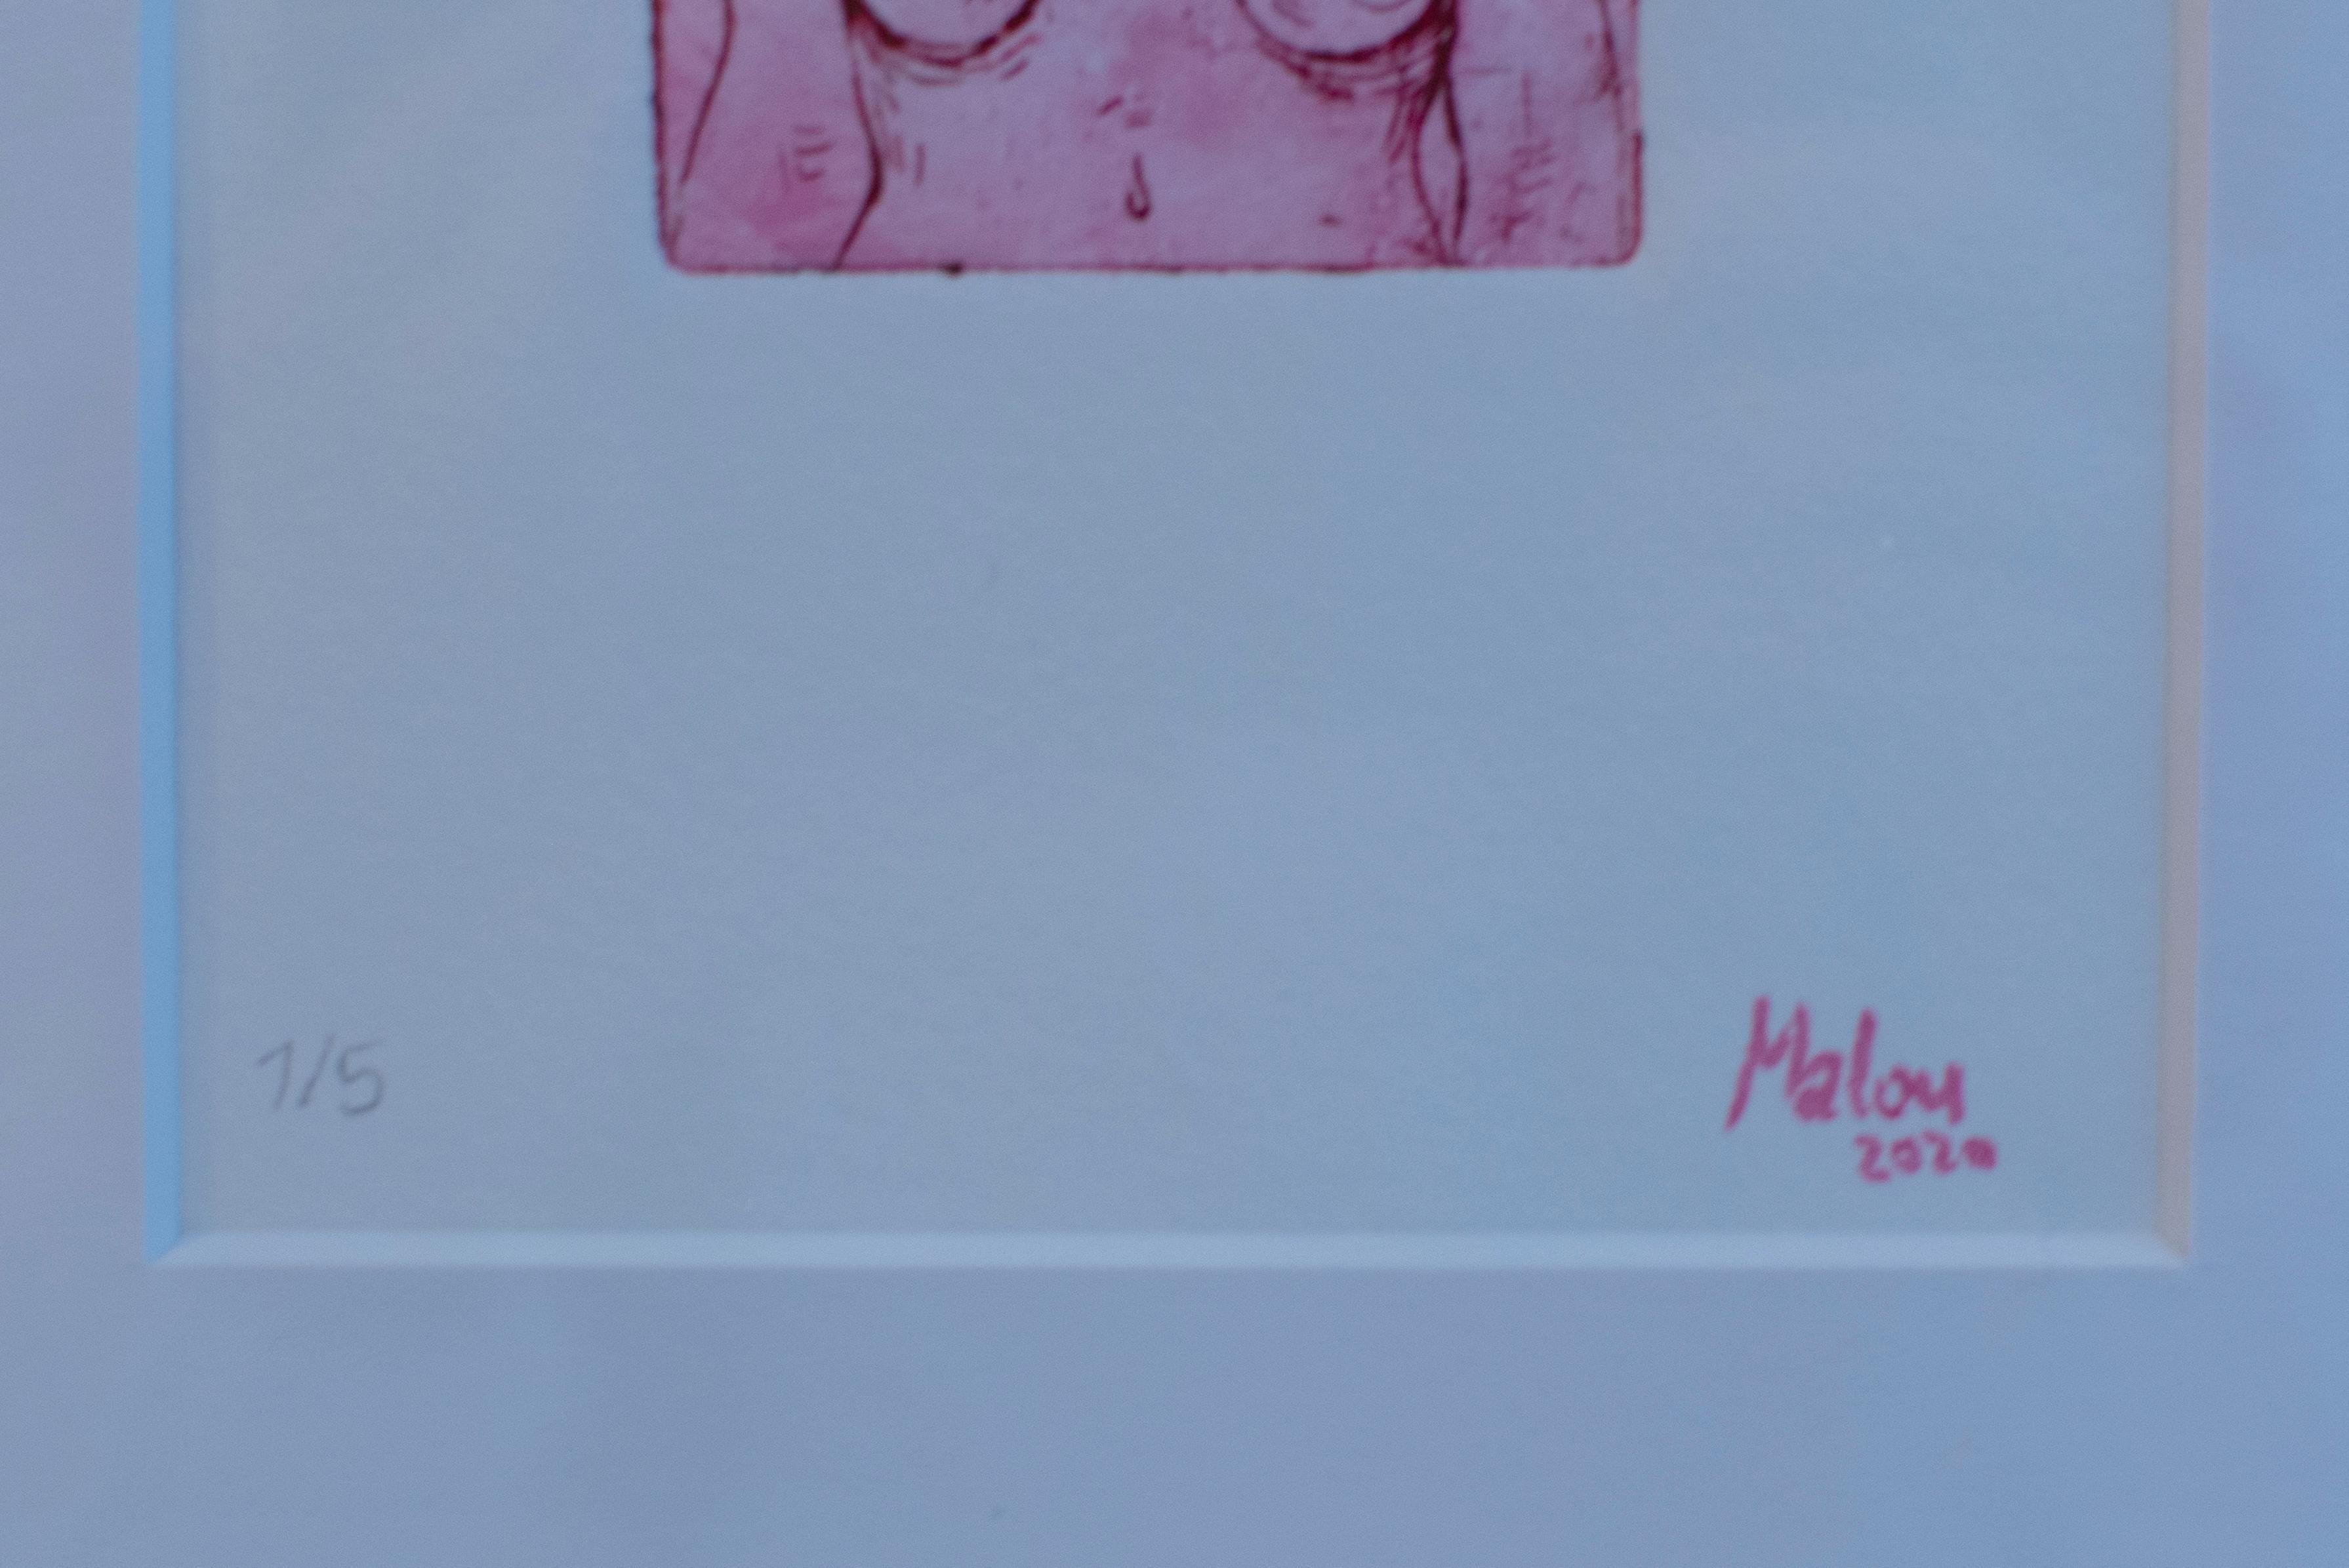 Oberkörper 2 - etching, paper, print, pink, white, young artist, 21st century - Gray Nude Print by Malou Großklaus